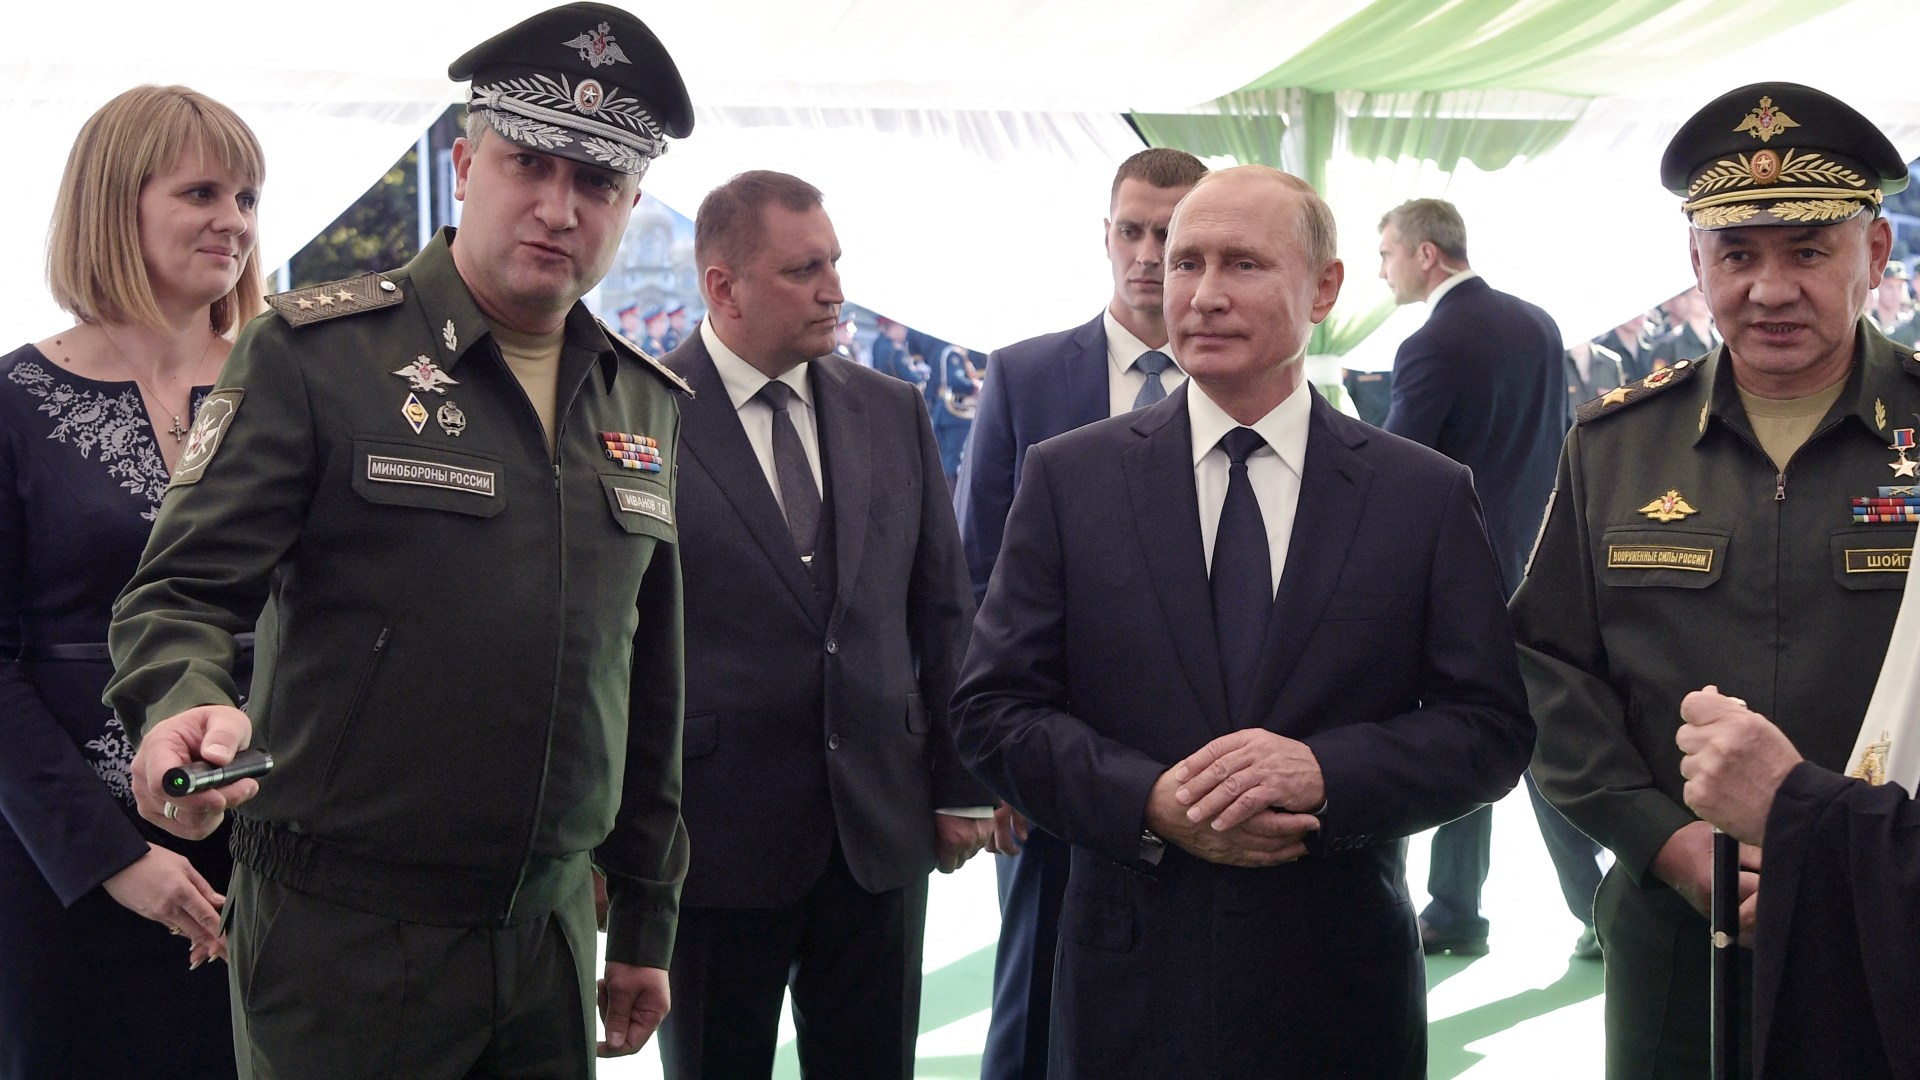 Russian military official arrested for bribe, faces 15 years in prison- shocking details revealed!